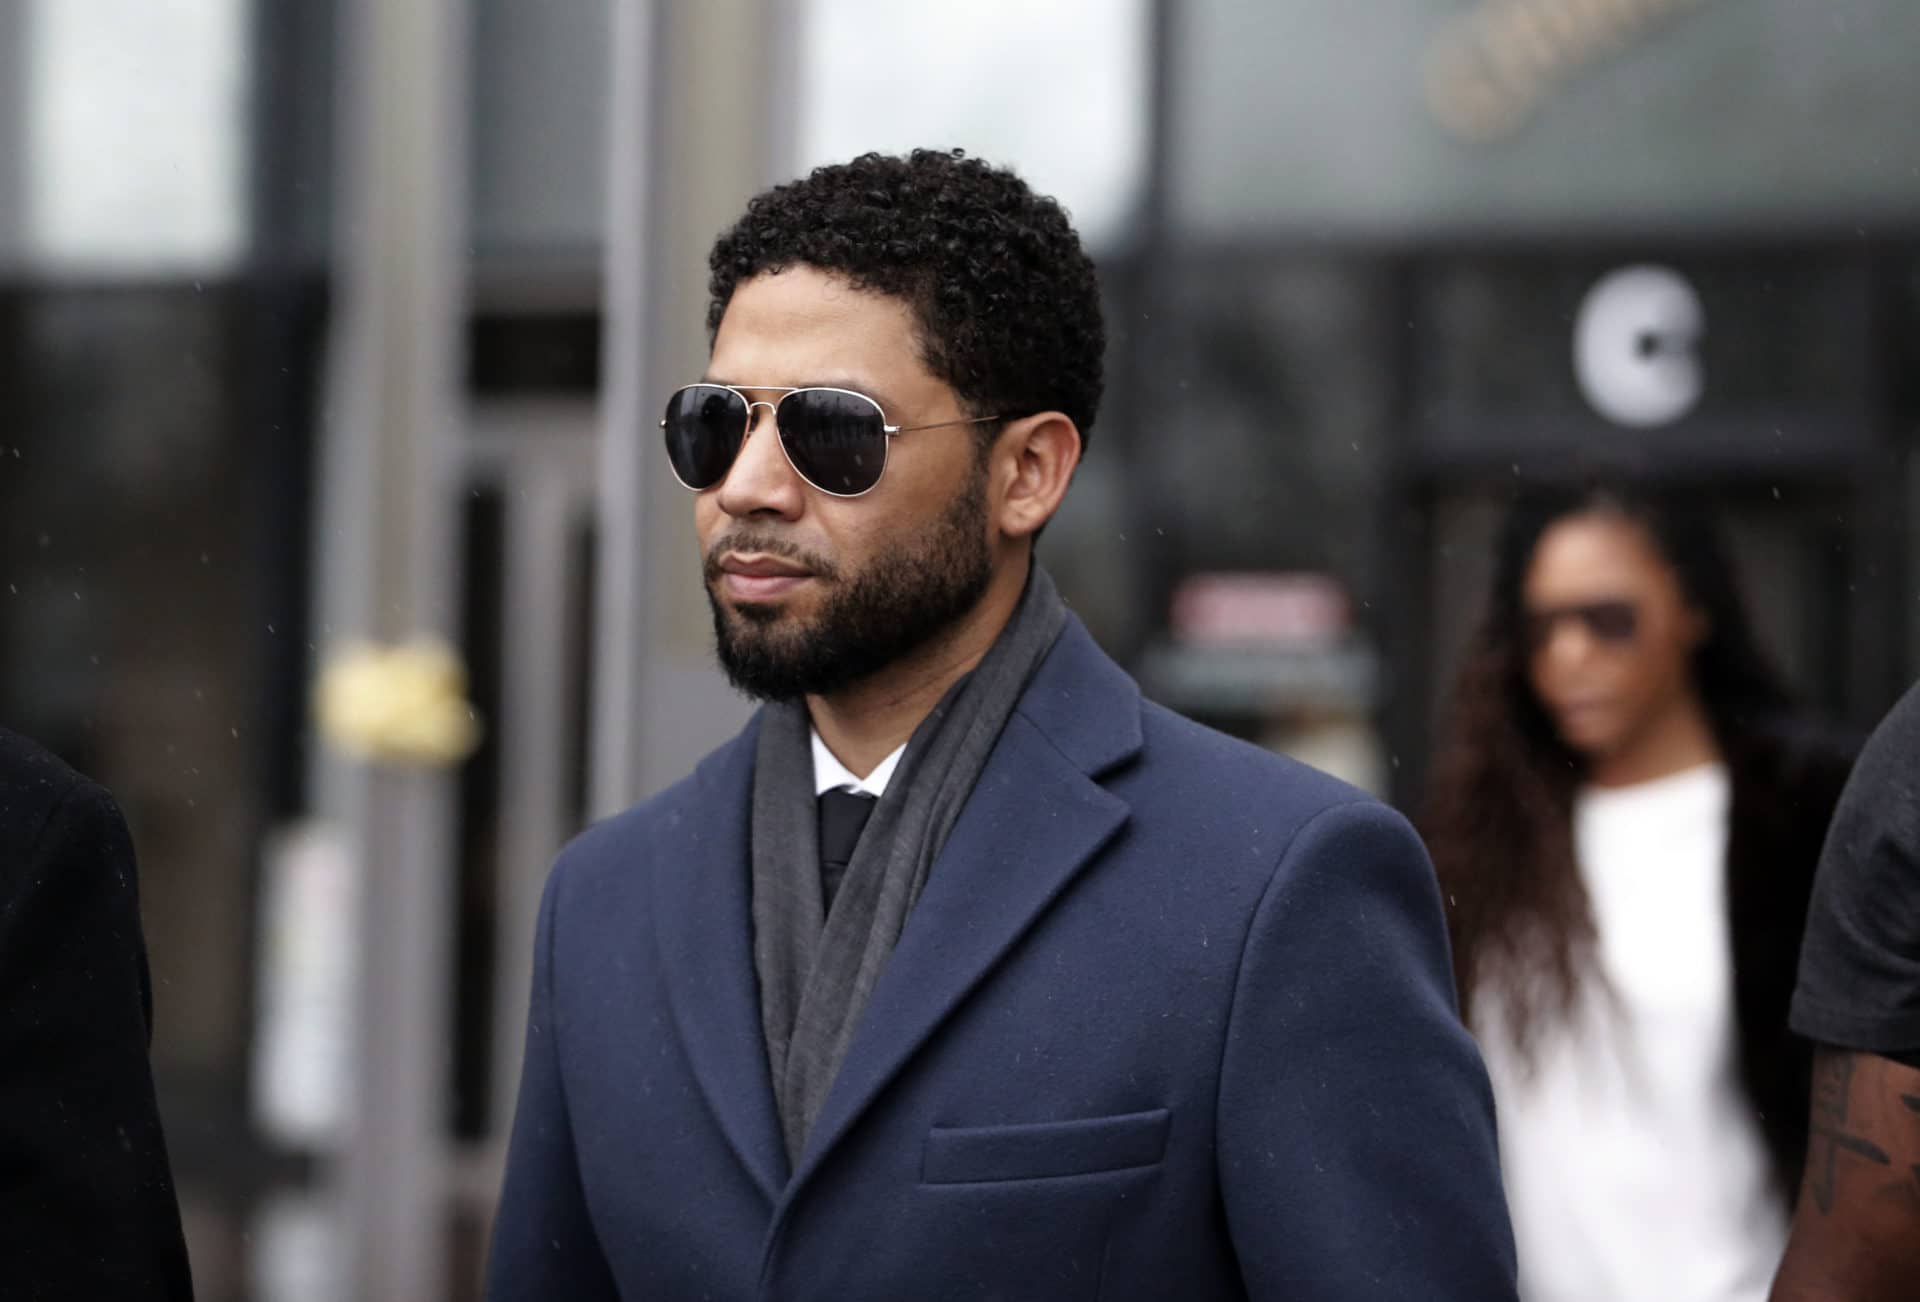 Jussie Smollett's Lawyer Says They're 'Weighing Options' To Sue Following Dropped Charges